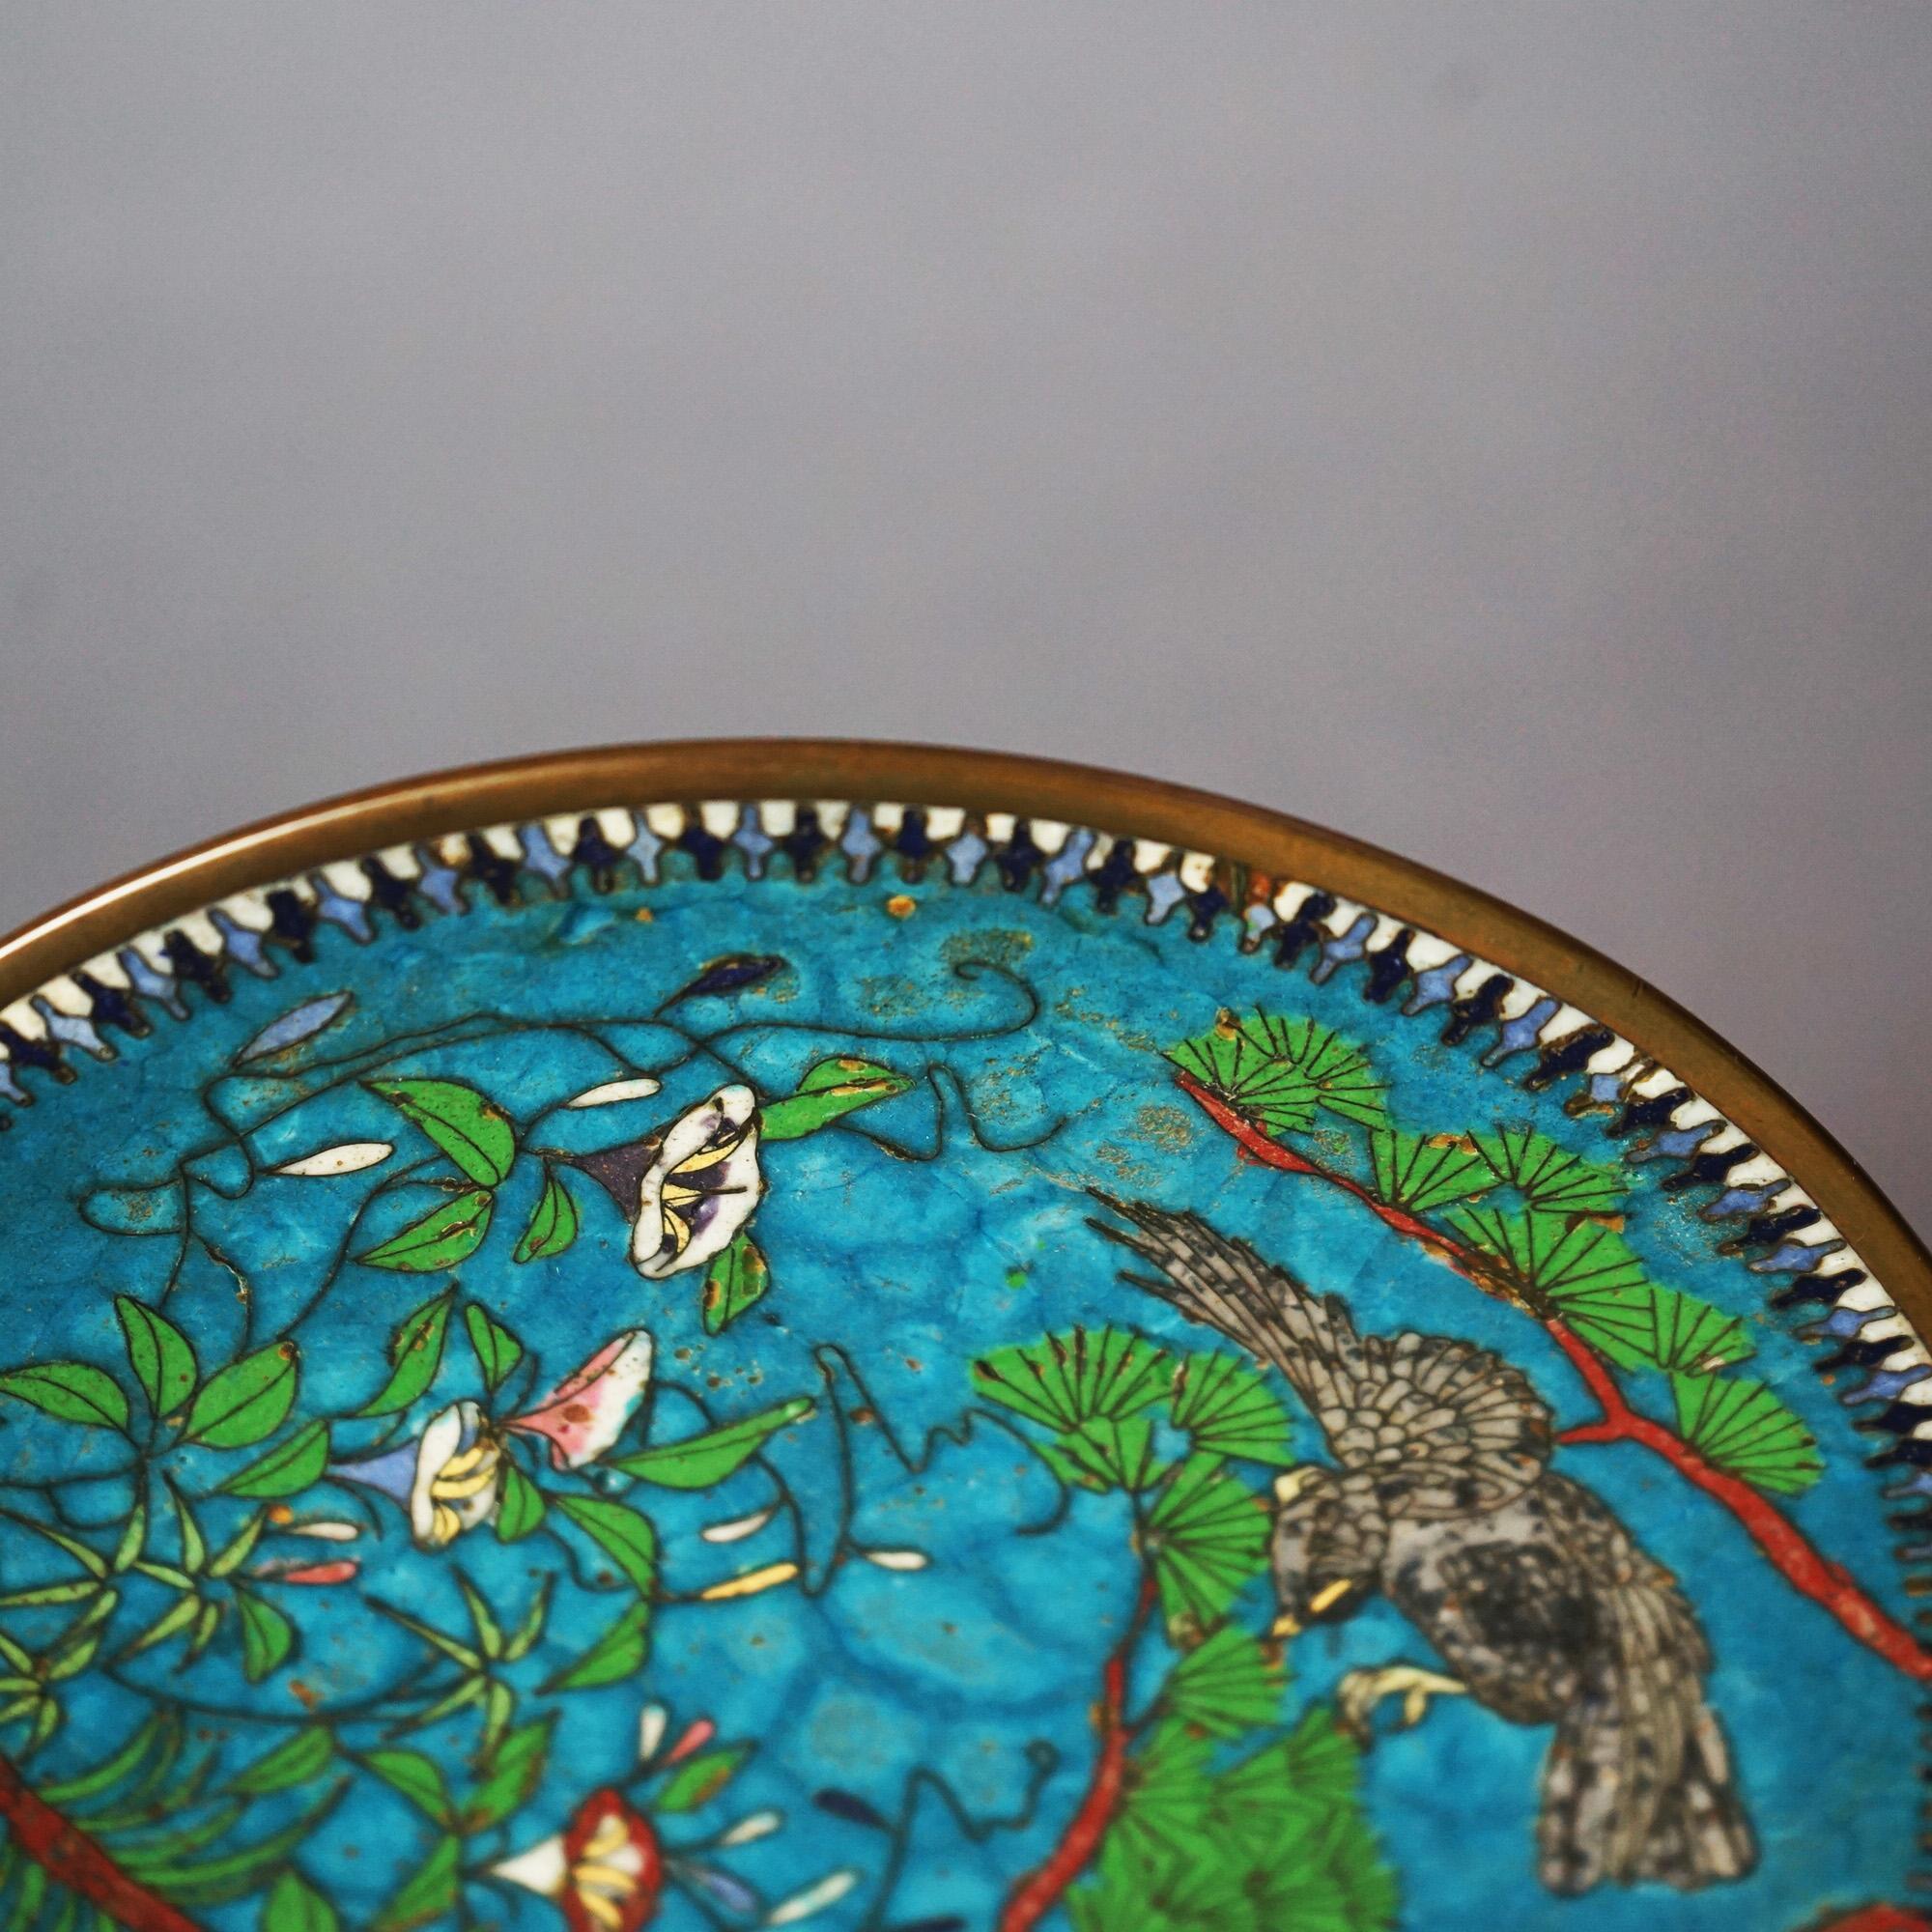 Metal Antique Japanese Meiji Cloisonné Enameled Plate with Flowers & Bird C1920 For Sale